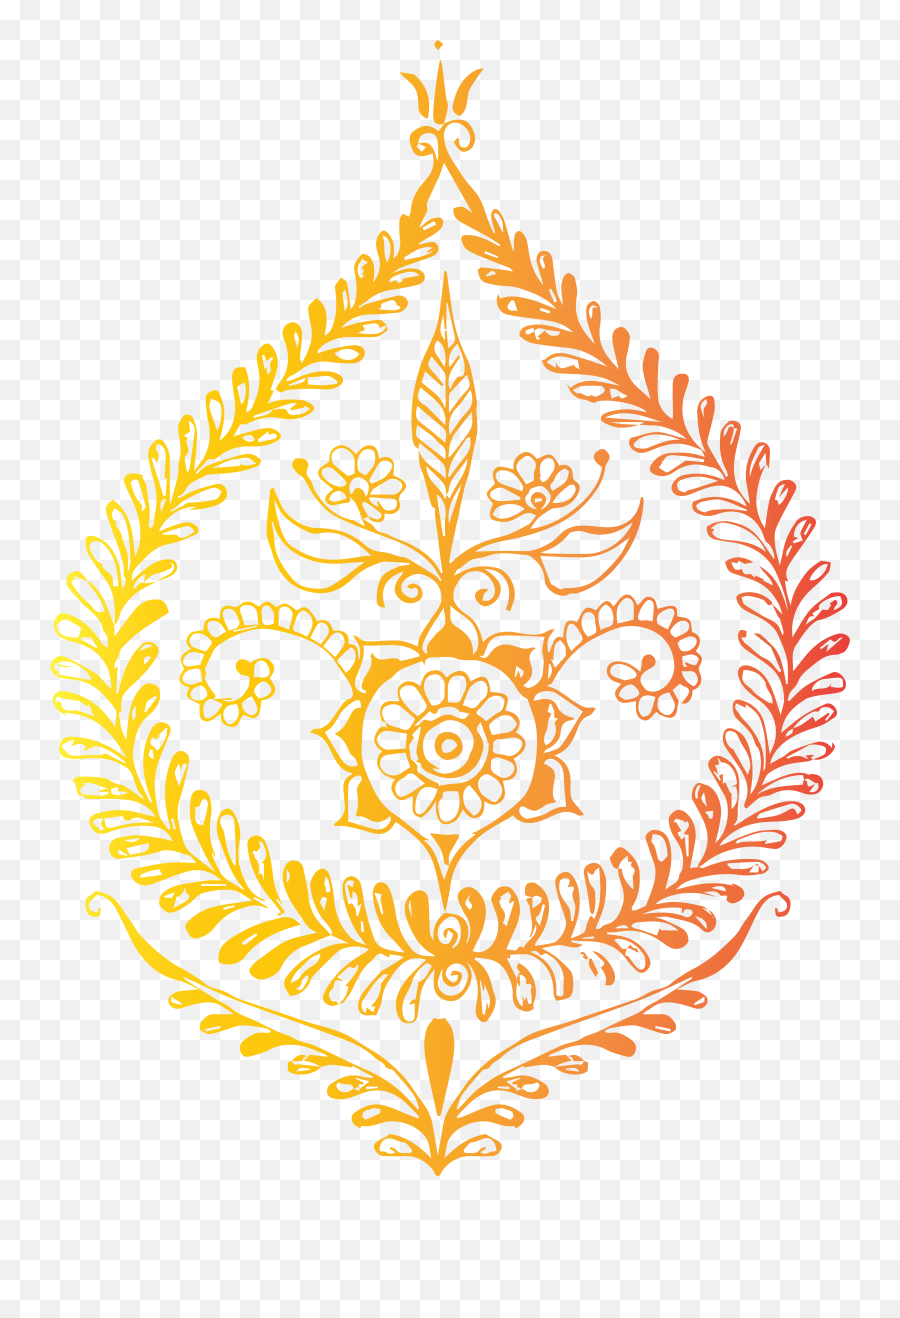 Decoration Free Png Clip Art Image - Portable Network Graphics,Indian Png